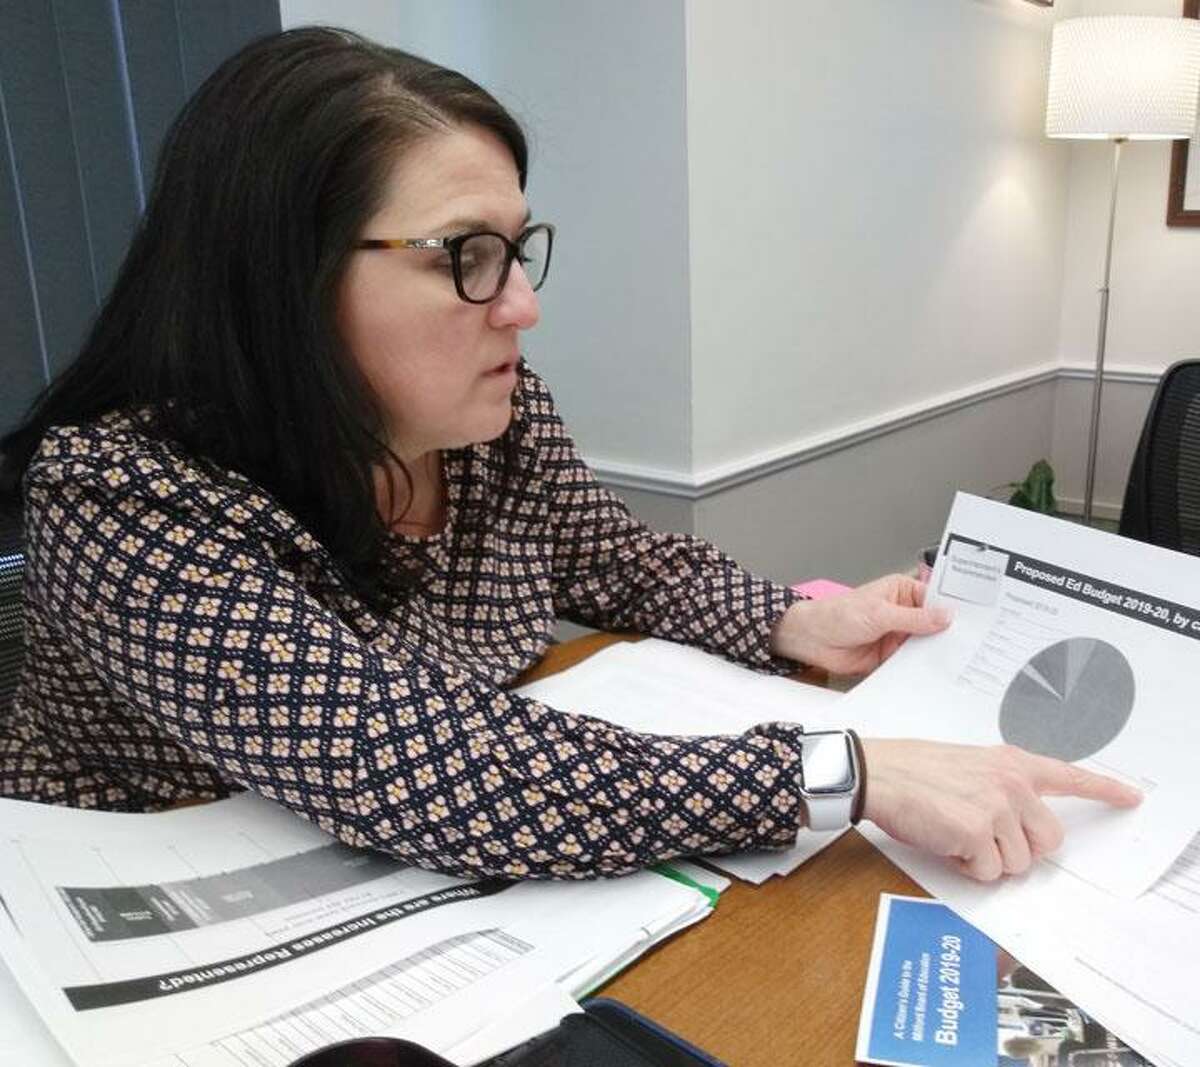 School Supt. Dr. Anna Cutaia discusses her 2019-2020 budget proposal with local reporters Monday afternoon.